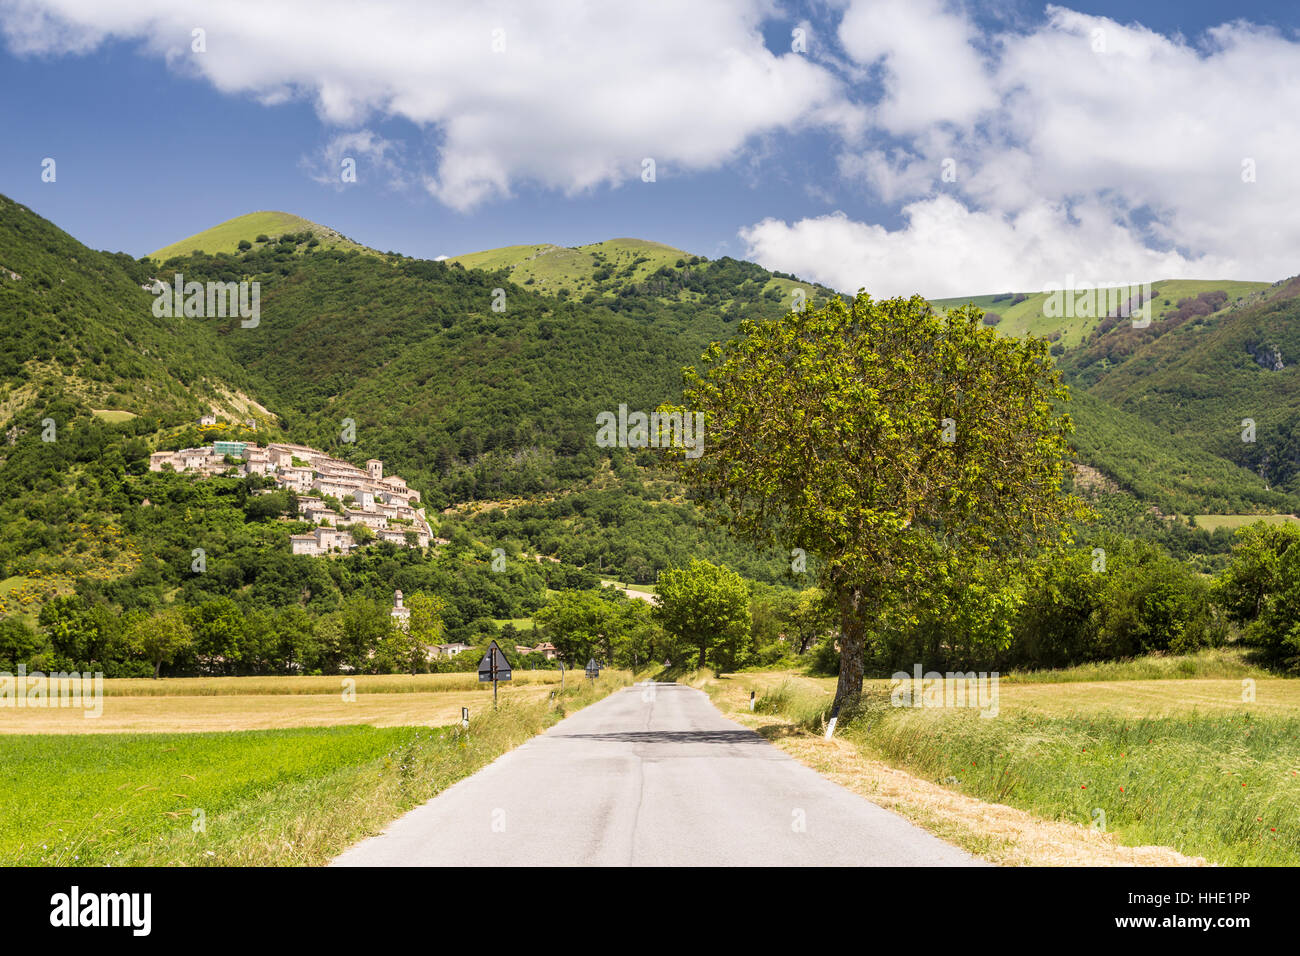 The village of Campi in the Monti Sibilini National Park, Umbria, Italy Stock Photo